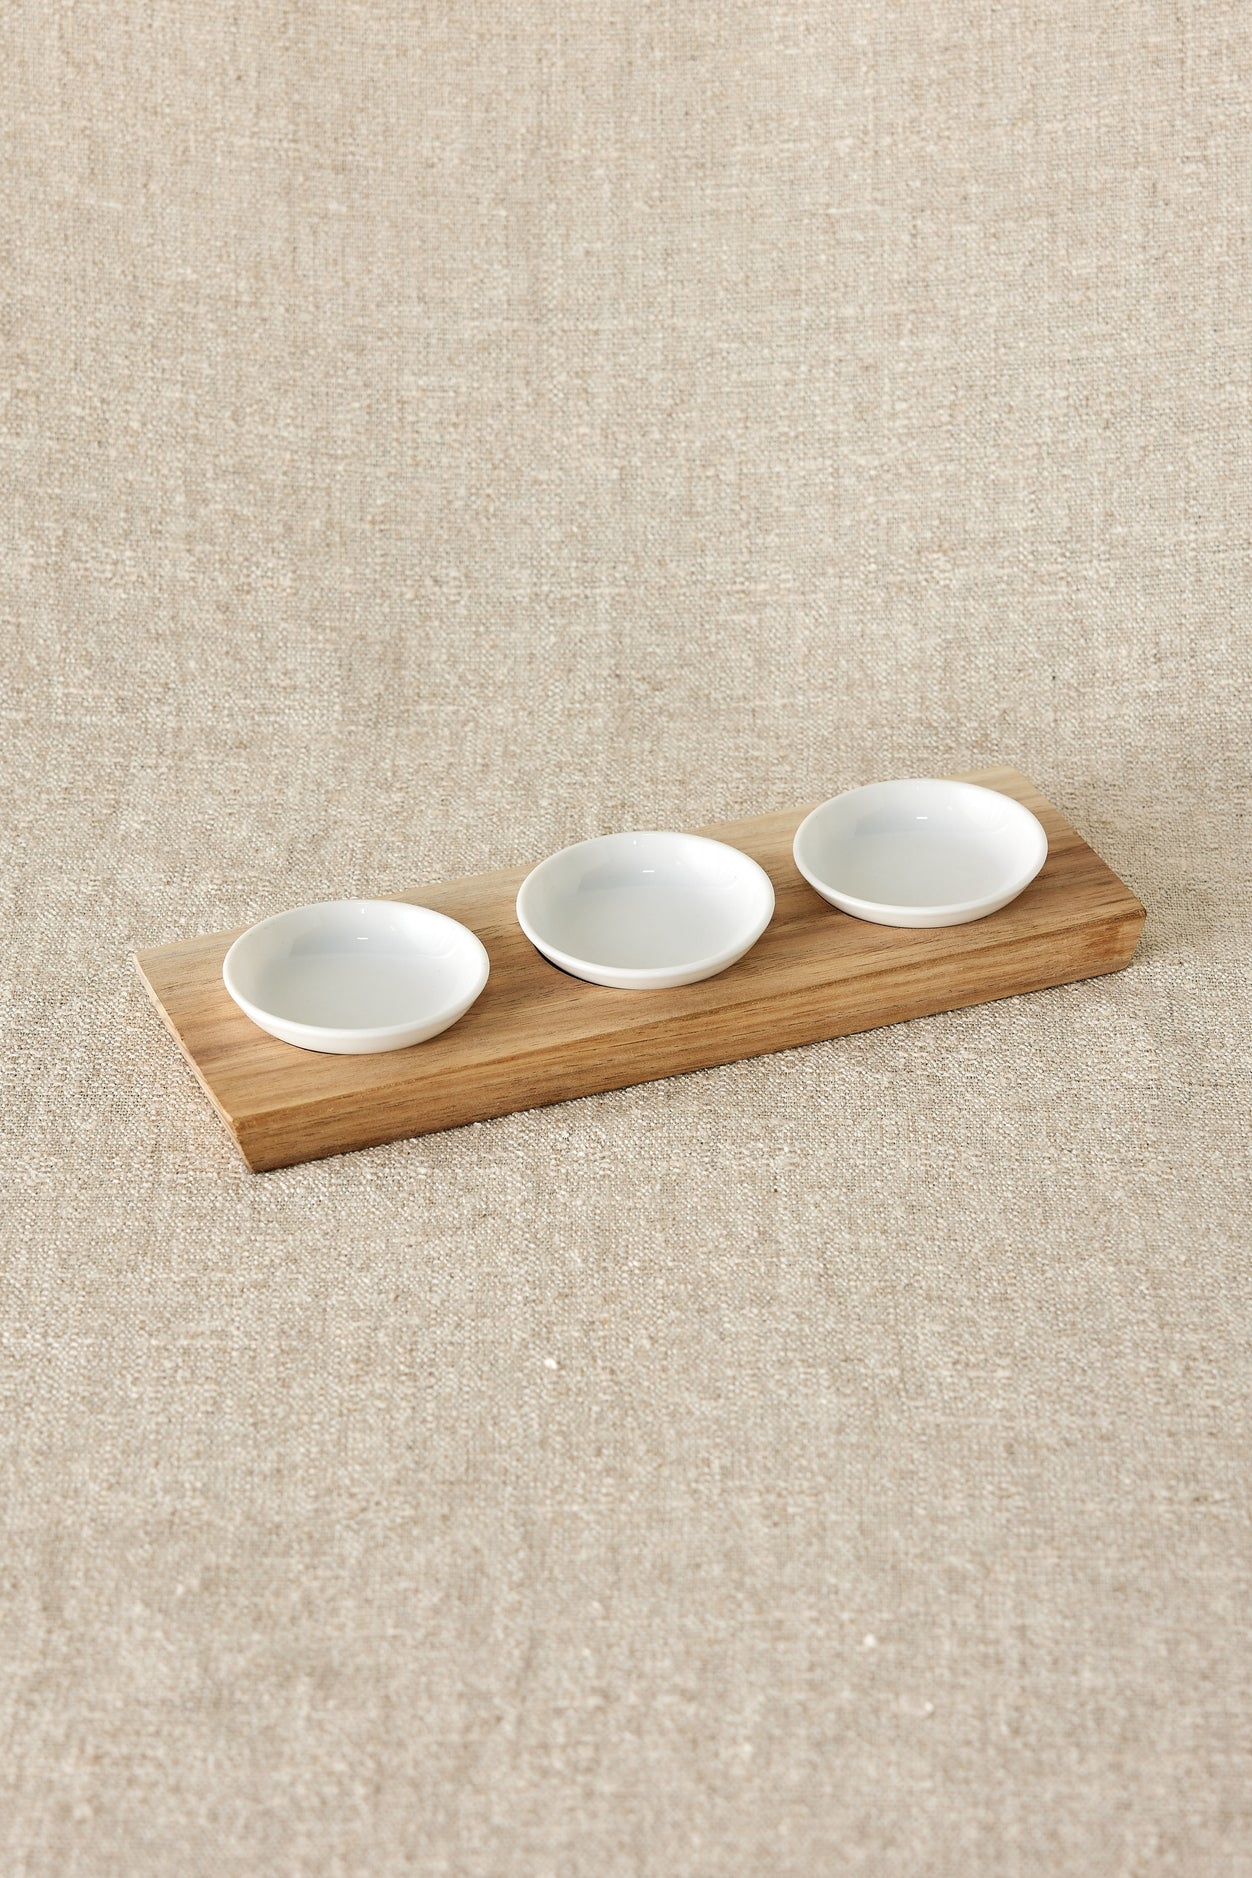 Crafted with a wooden base and three exquisite white ceramic bowls, this set seamlessly complements any home décor. Elevate your gatherings with this versatile set, ideal for presenting sauces, spices, or delightful little snacks. Handmade in South Africa.